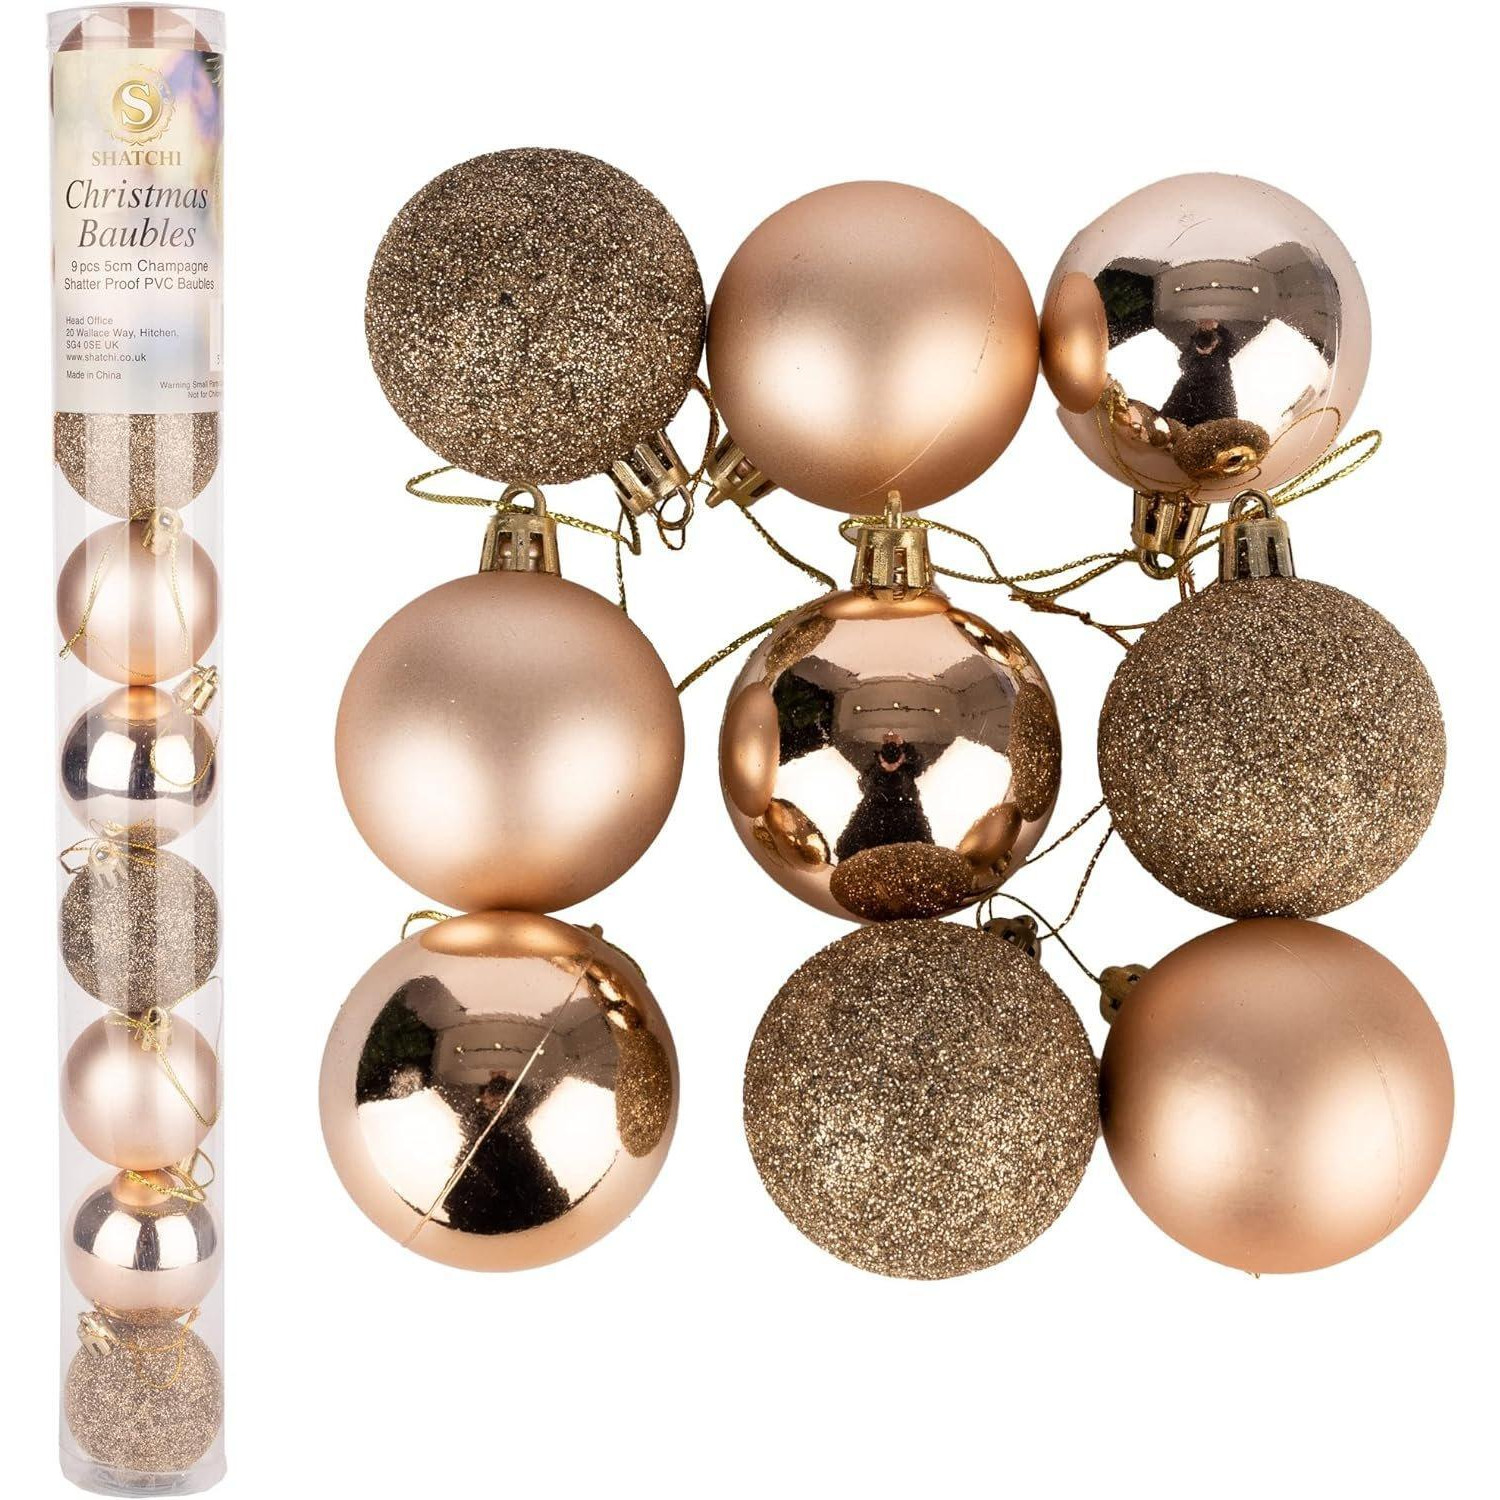 60mm/6Pcs Christmas Baubles Shatterproof Champagne Gold,Tree Decorations